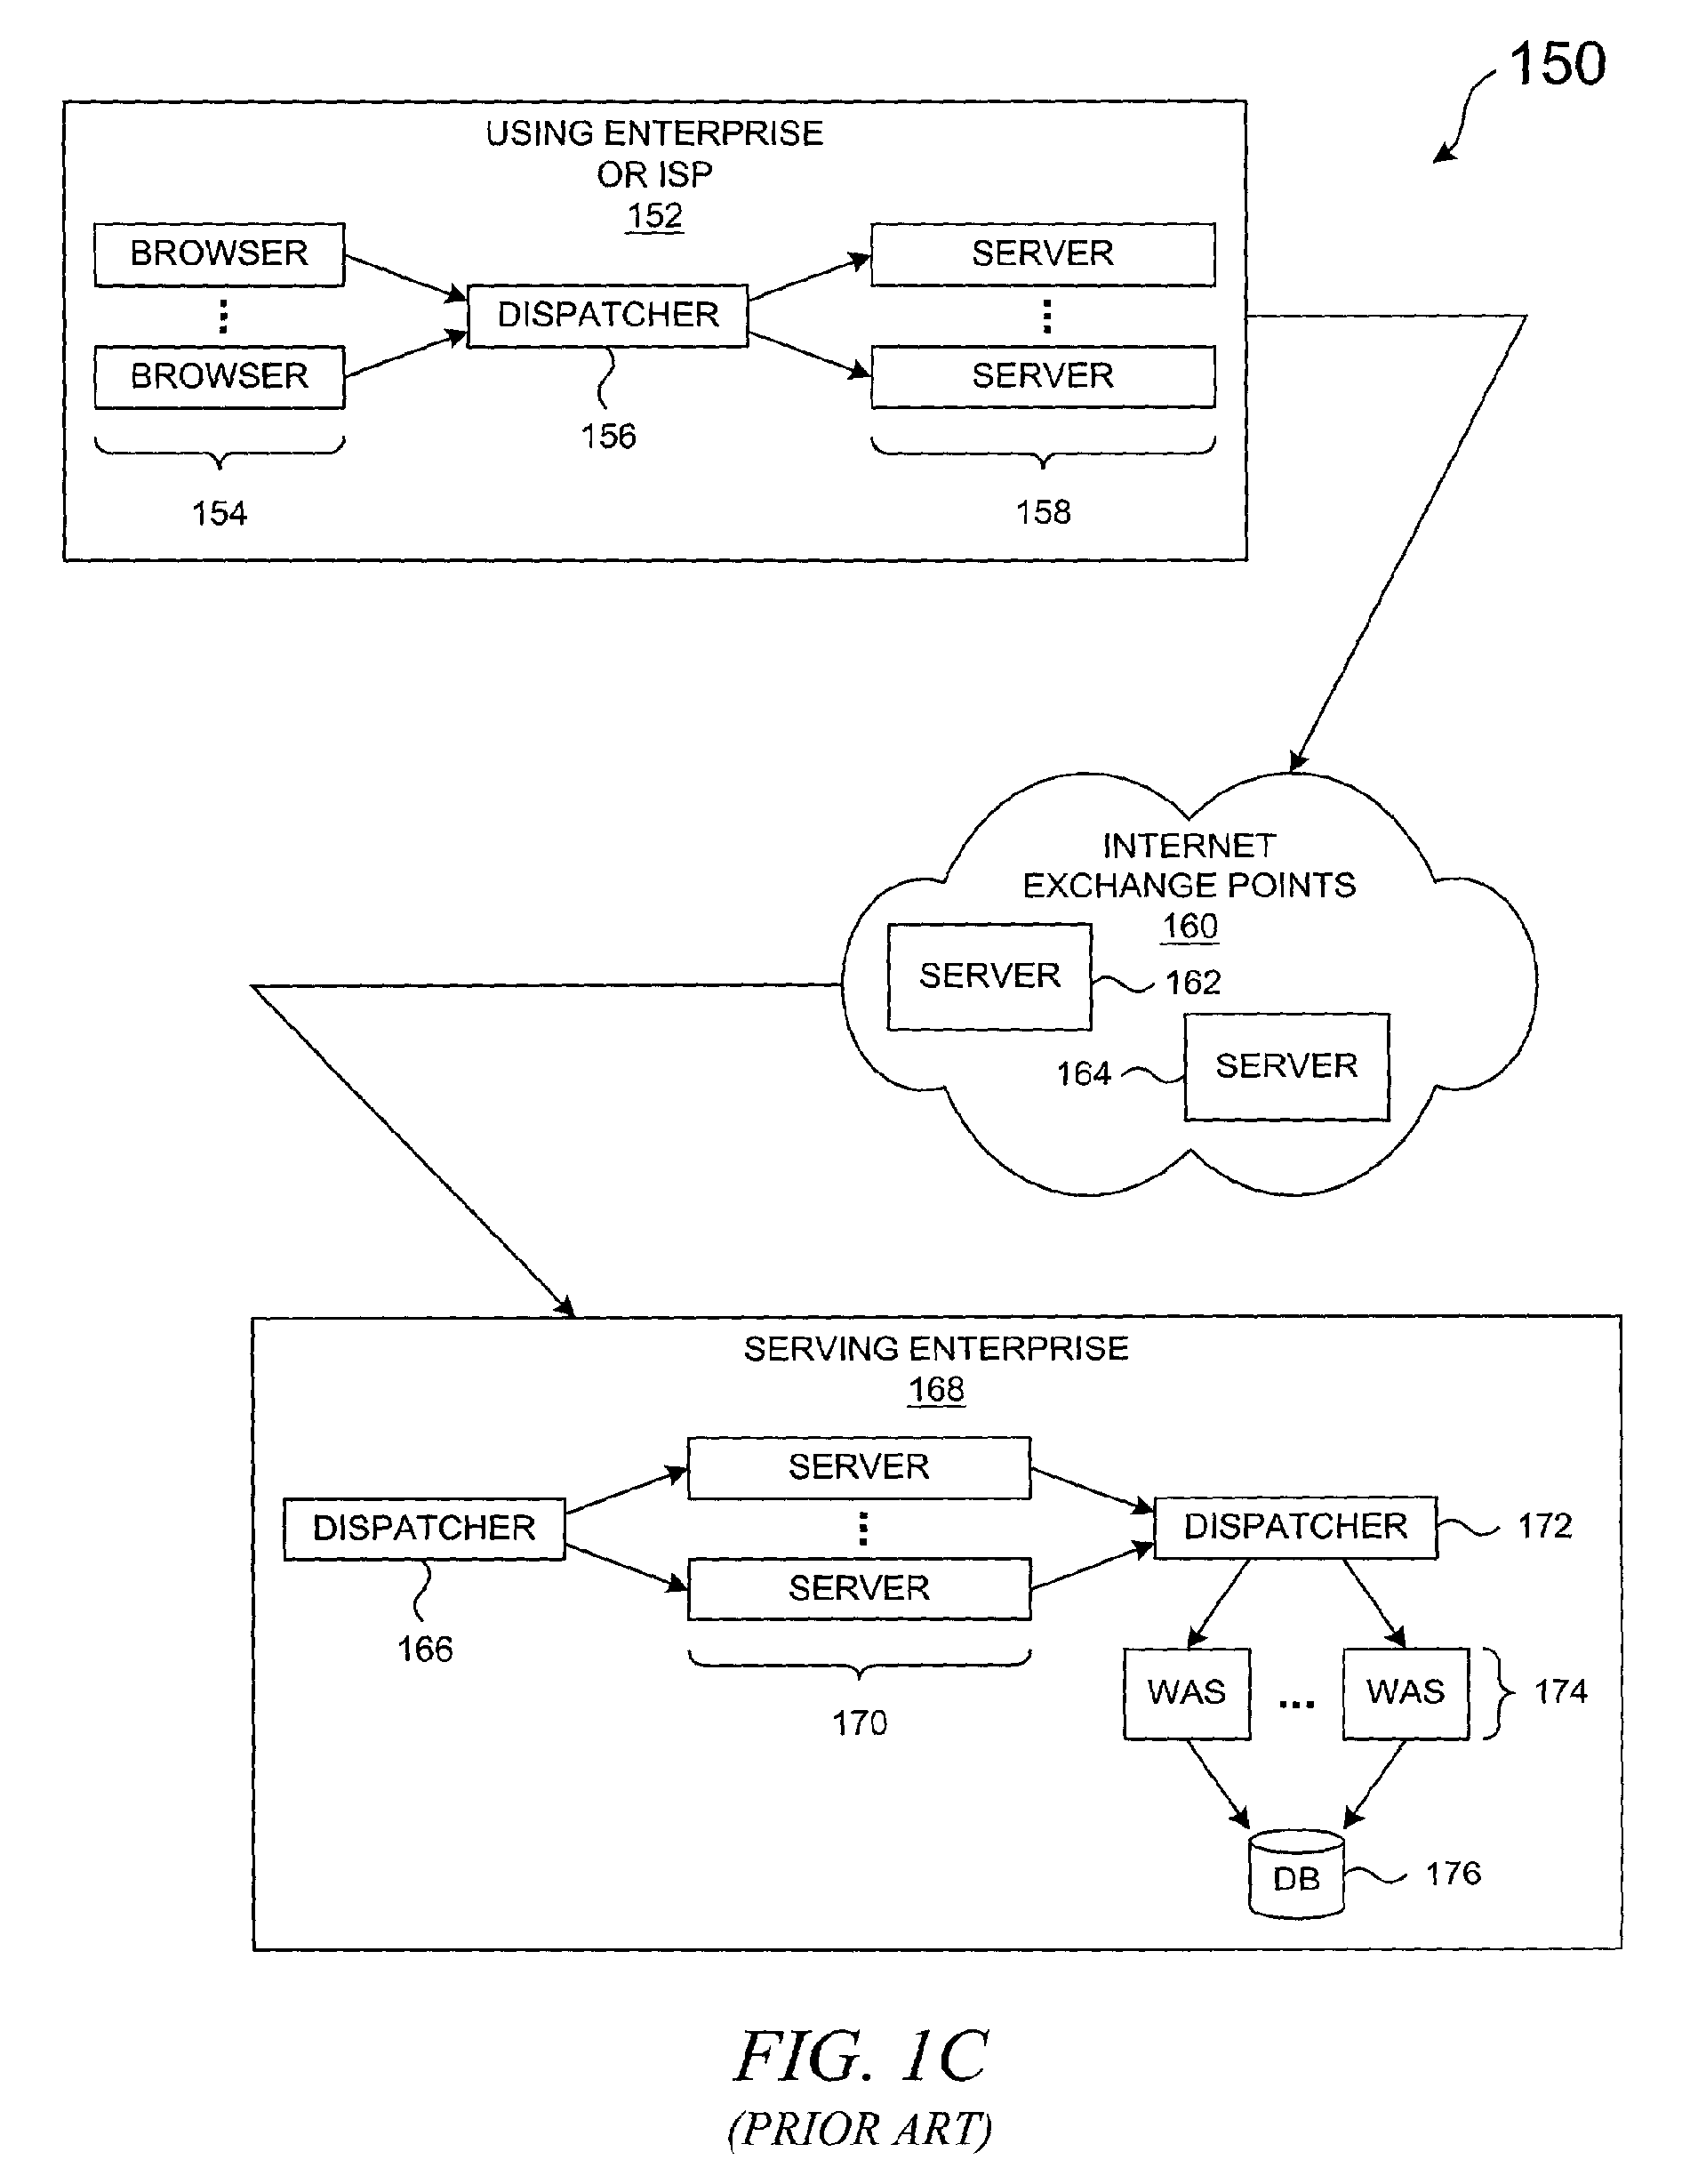 Method and system for caching message fragments using an expansion attribute in a fragment link tag